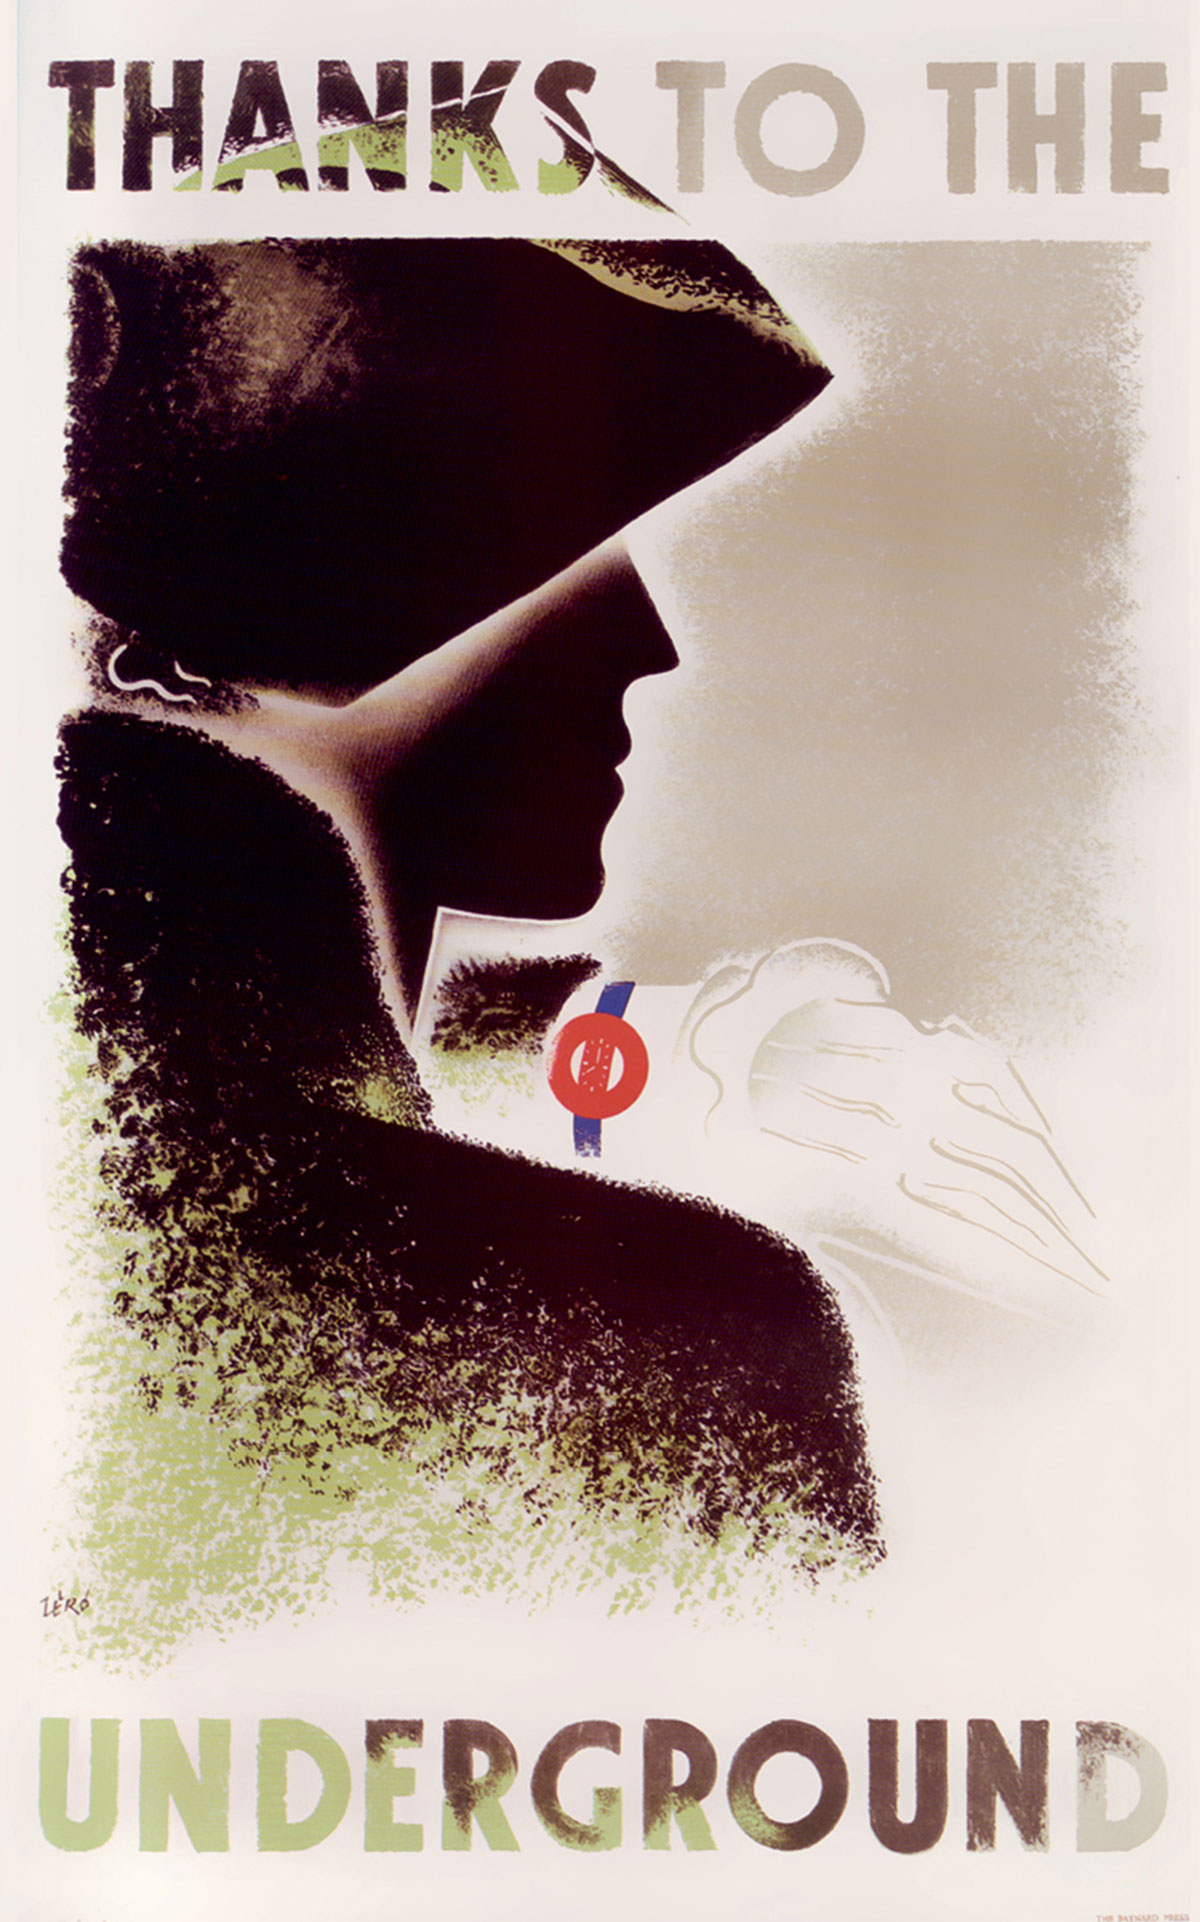 Hans Schleger’s nineteen thirty-five London Transport poster titled “Thanks to the Underground” depicting a person checking their watch, here represented as the London Underground symbol.